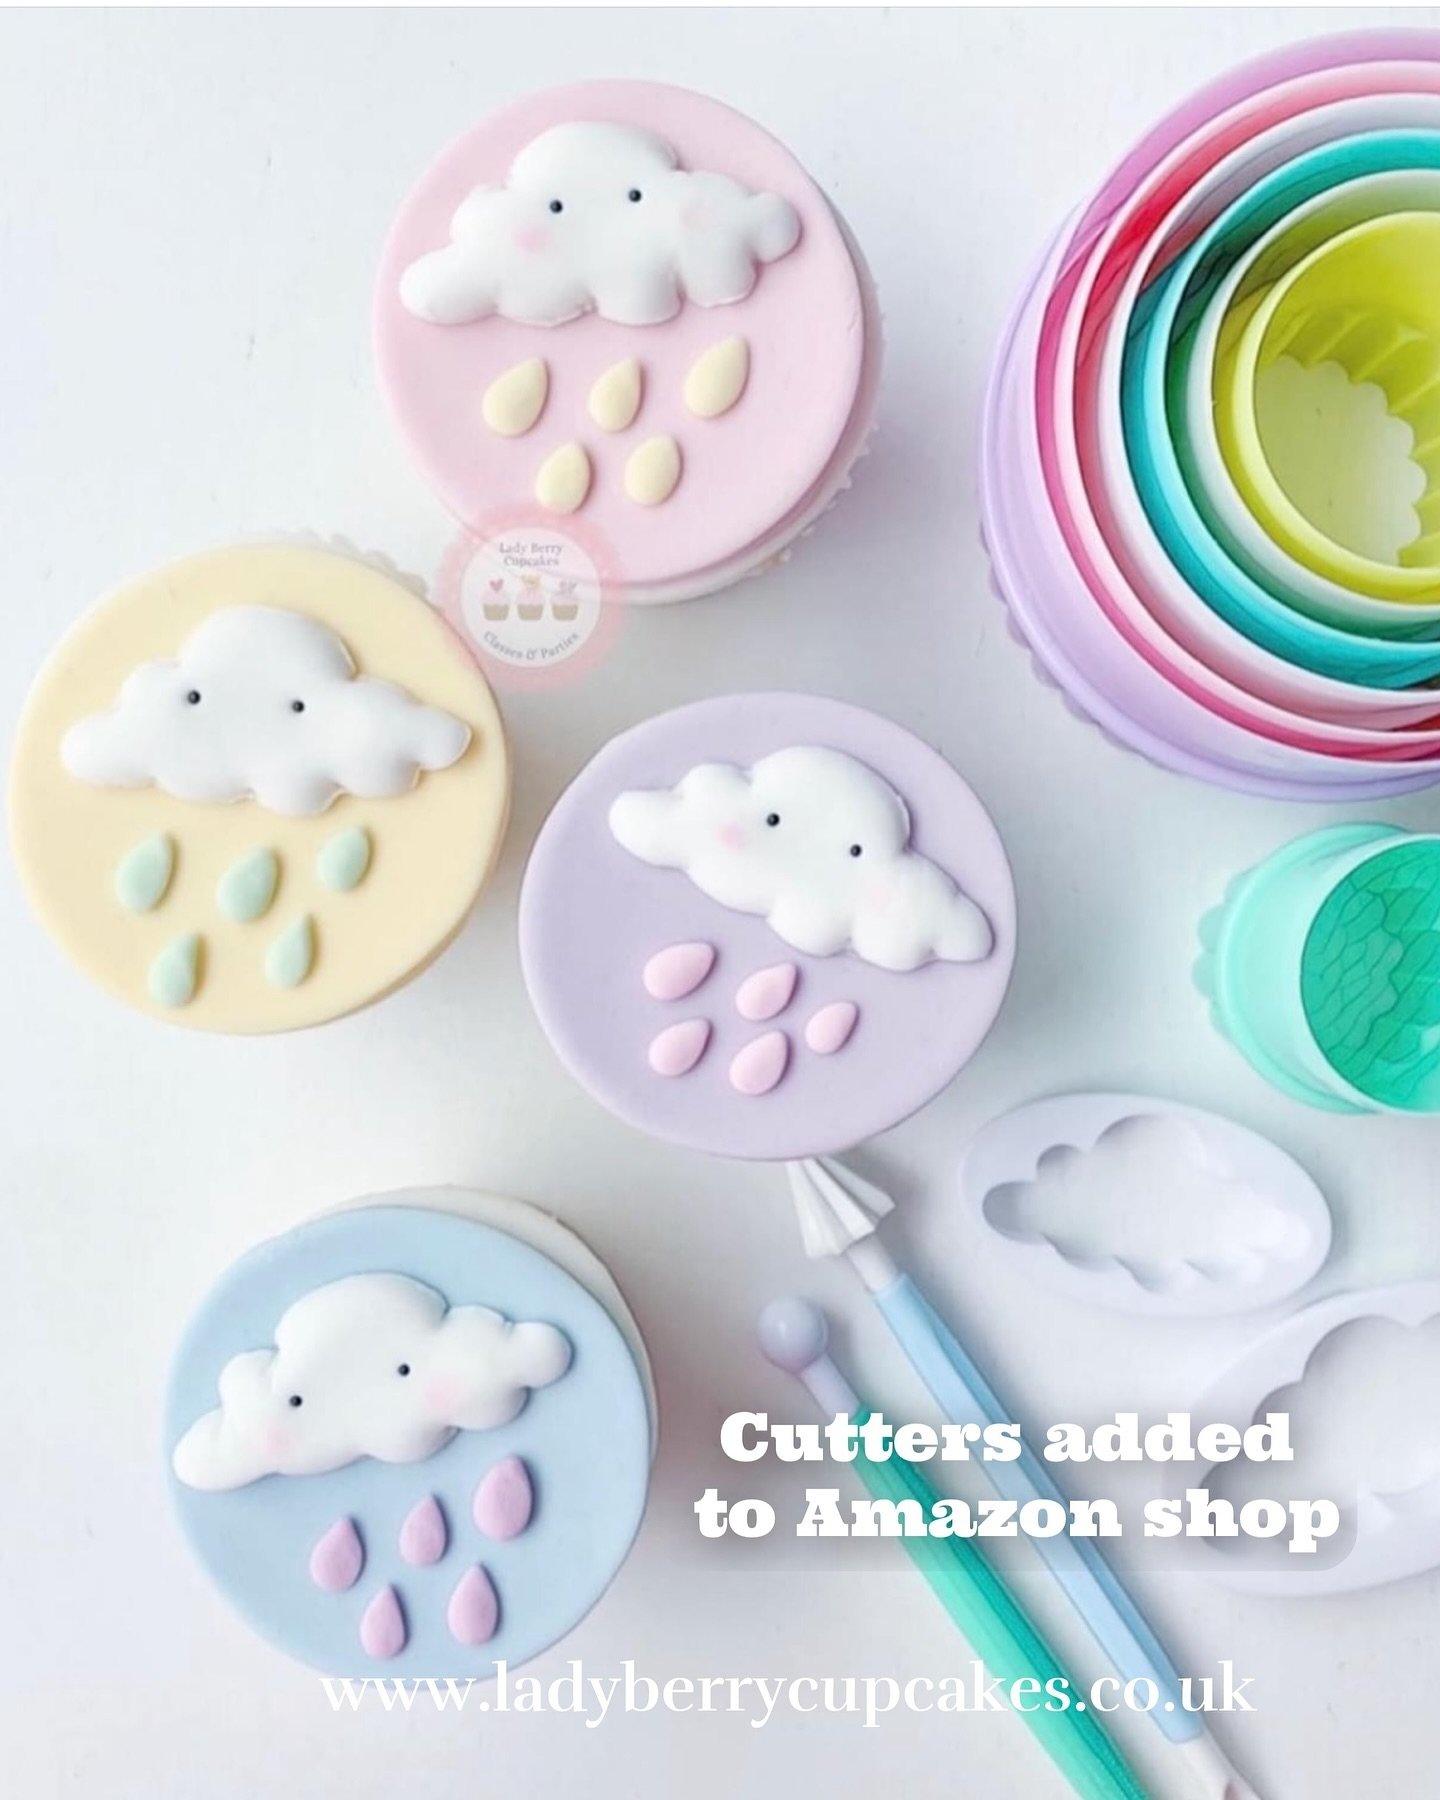 ☁️ Every cloud has a sweet silver lining&hellip;Have a sweet day! 🌈
🛍️I have added cute cloud cutters to the Amazon shop for you! The link is in the profile. 

#Cupcake #Cupcakes #CupcakeParty #CupcakeDecoratingParty #Hen Party #Fondant #FondantTop